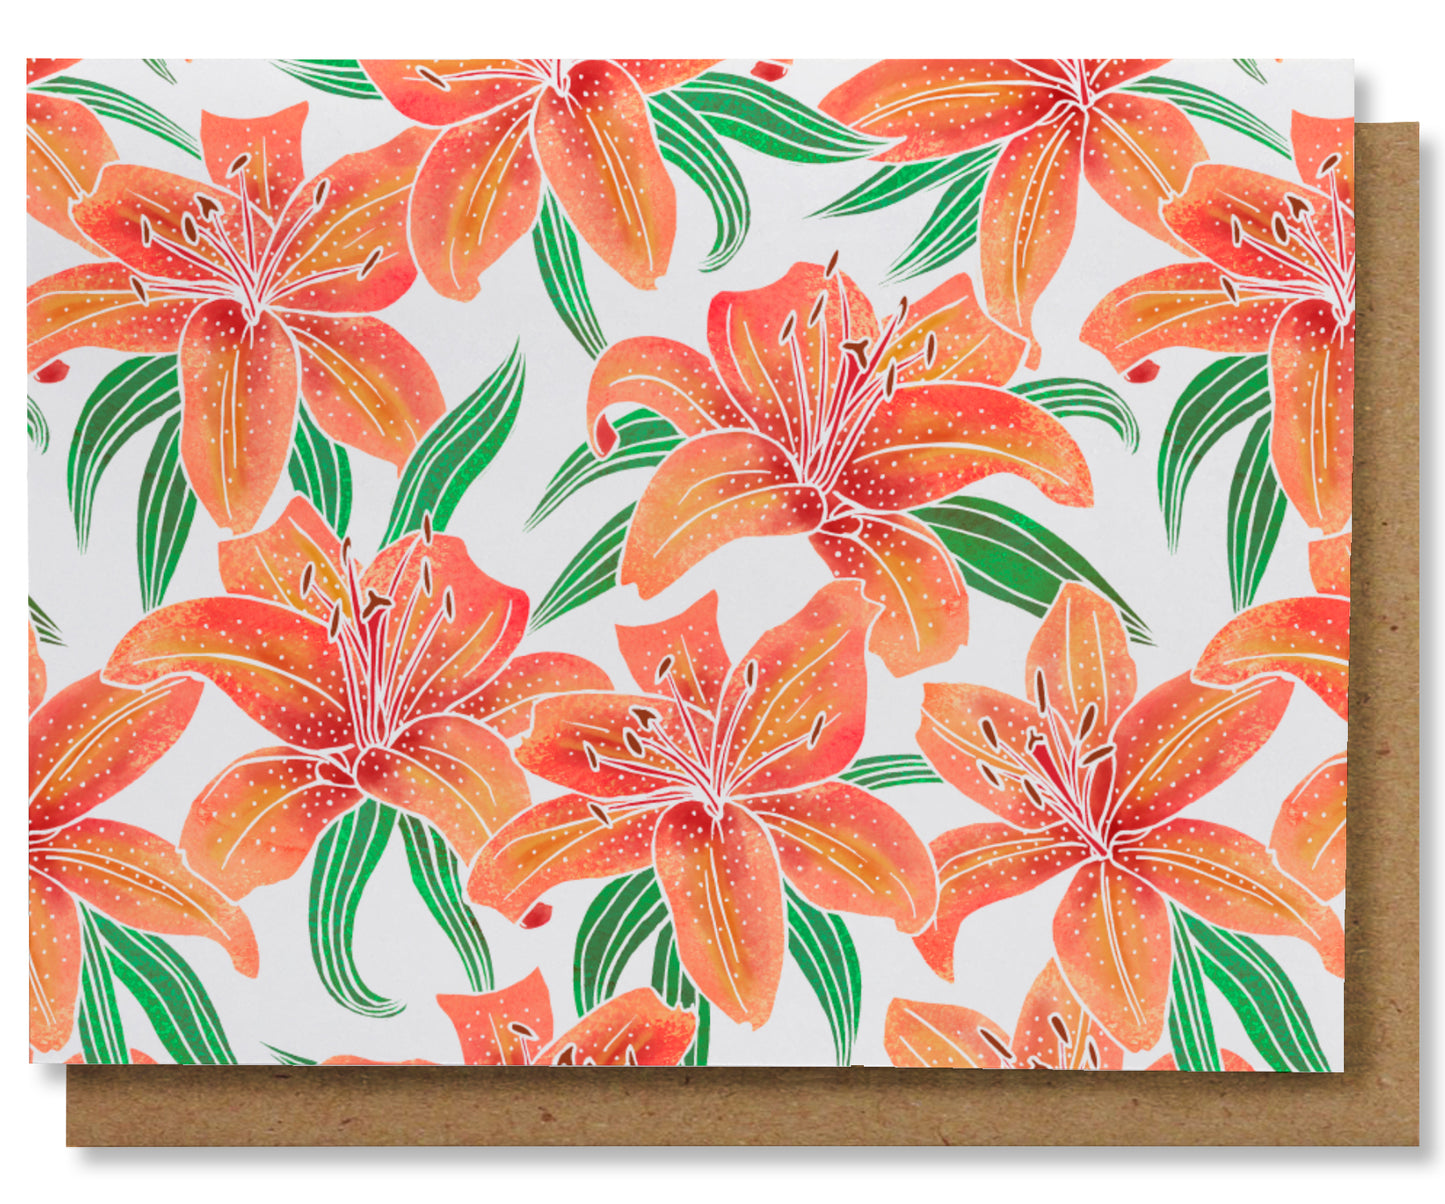 Tiger Lilies - Illustrated Floral Note Card Box Set